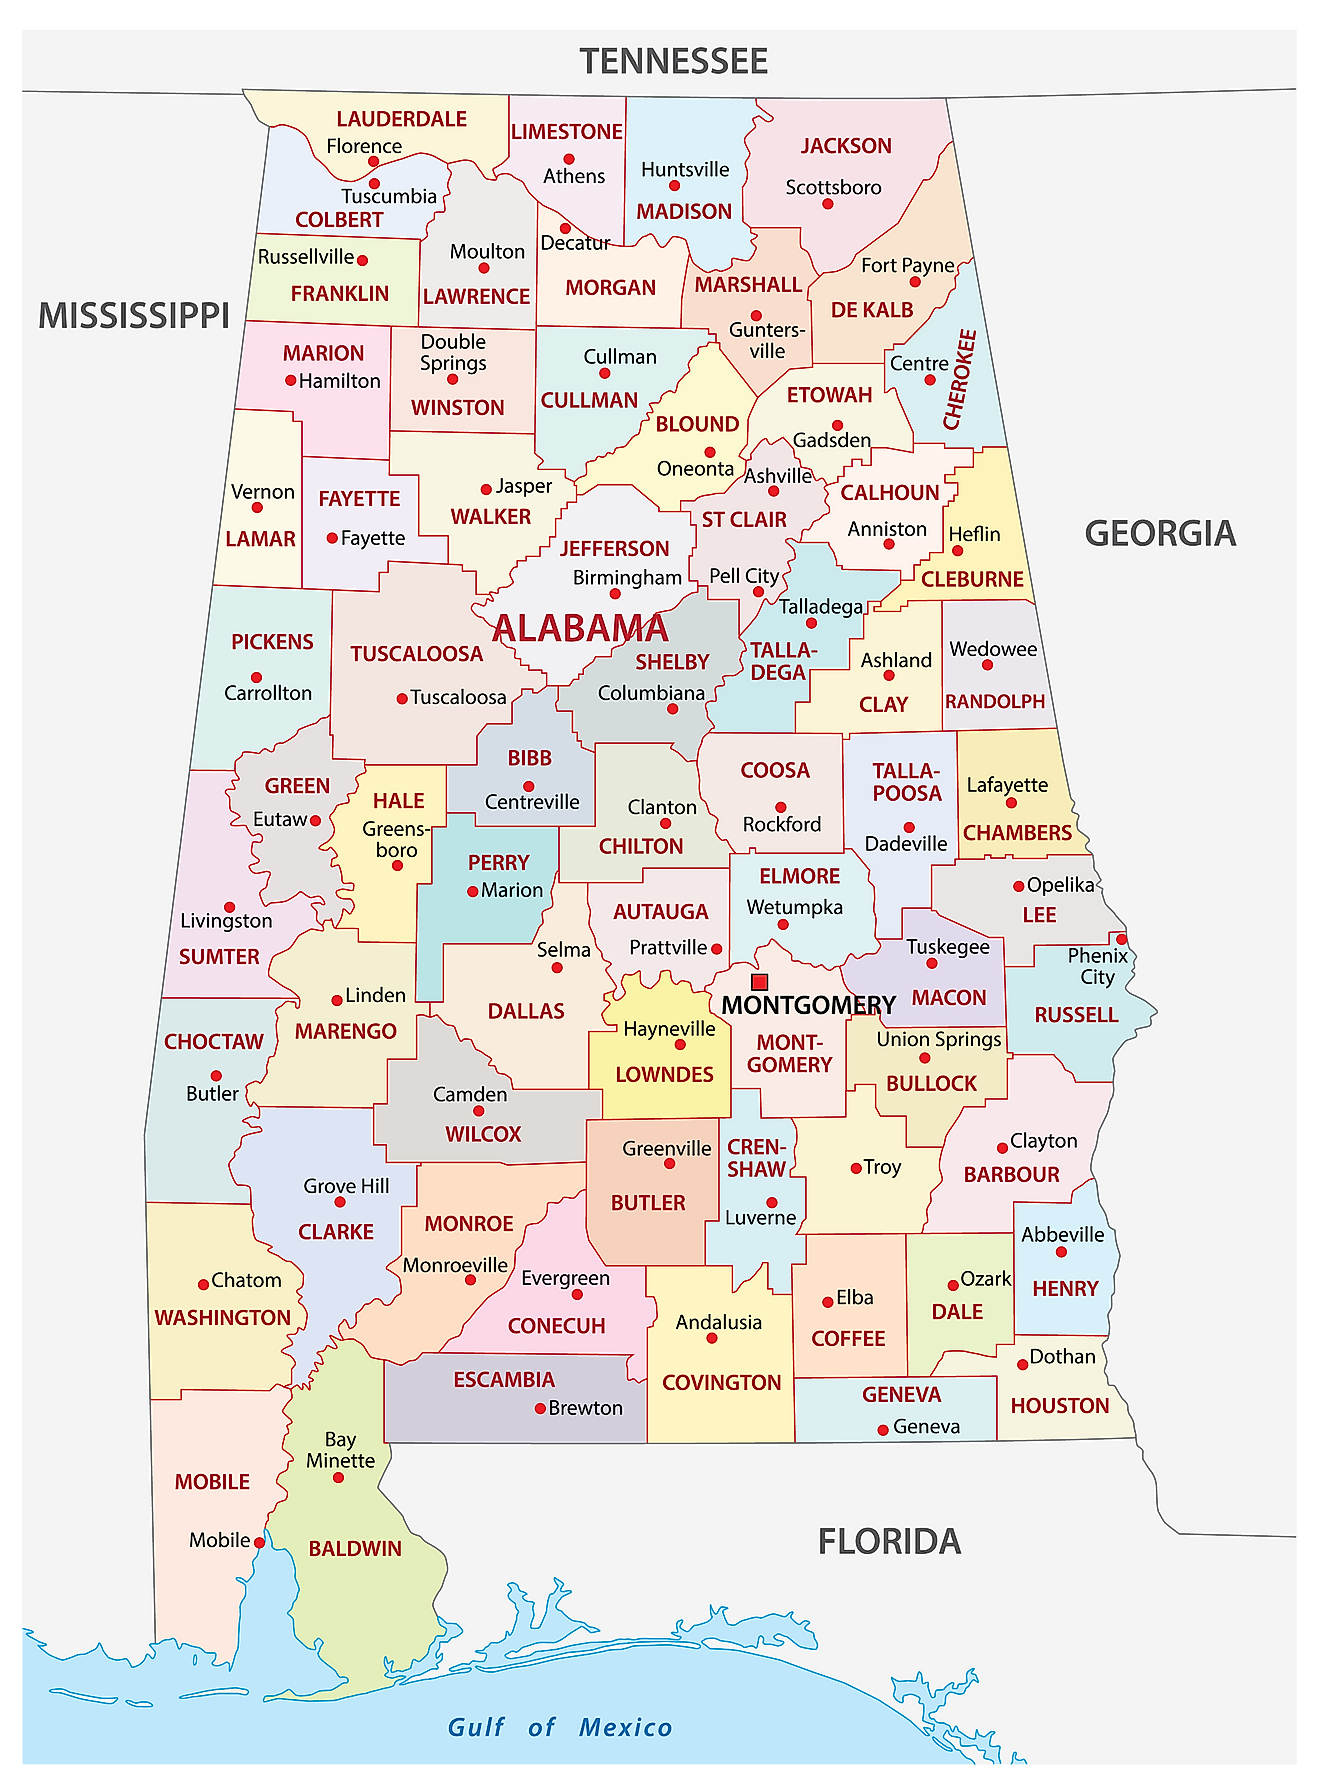 Administrative Map of Alabama showing its 67 counties and the capital city - Montgomery